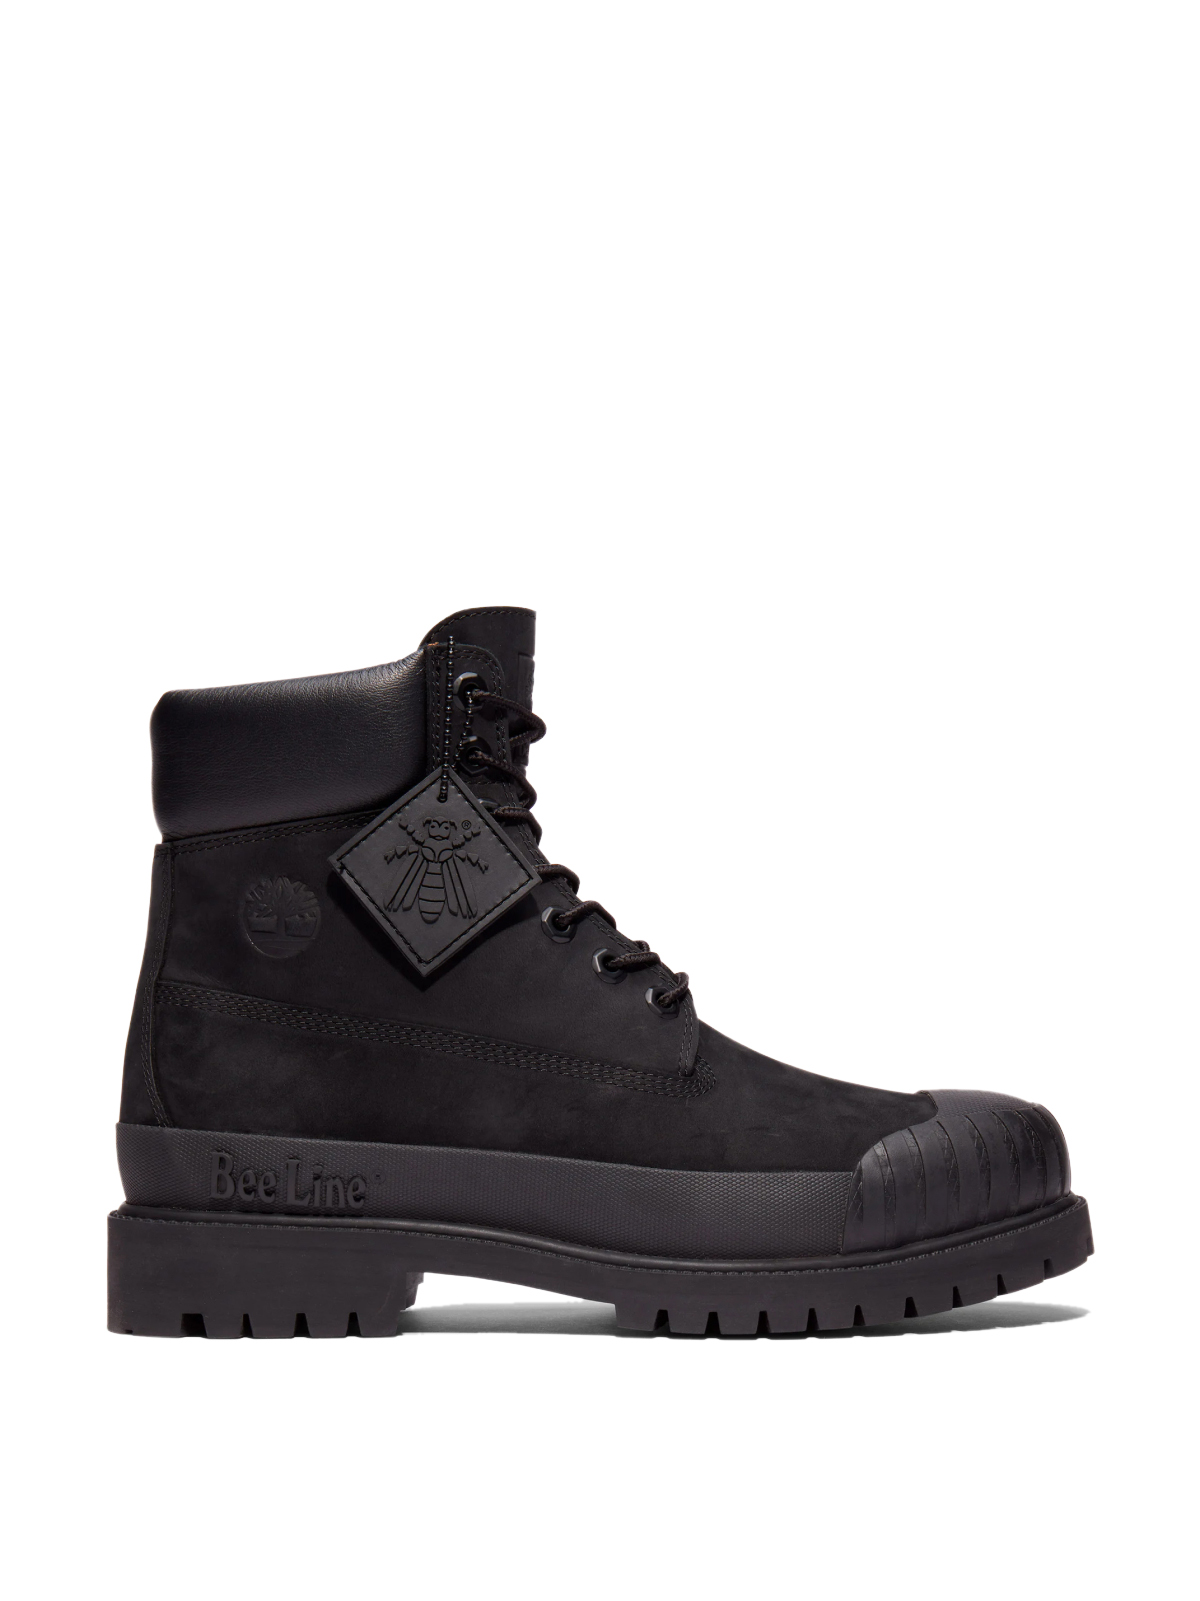 Bee Line x Timberland 6 Inch Rubber Toe Boots